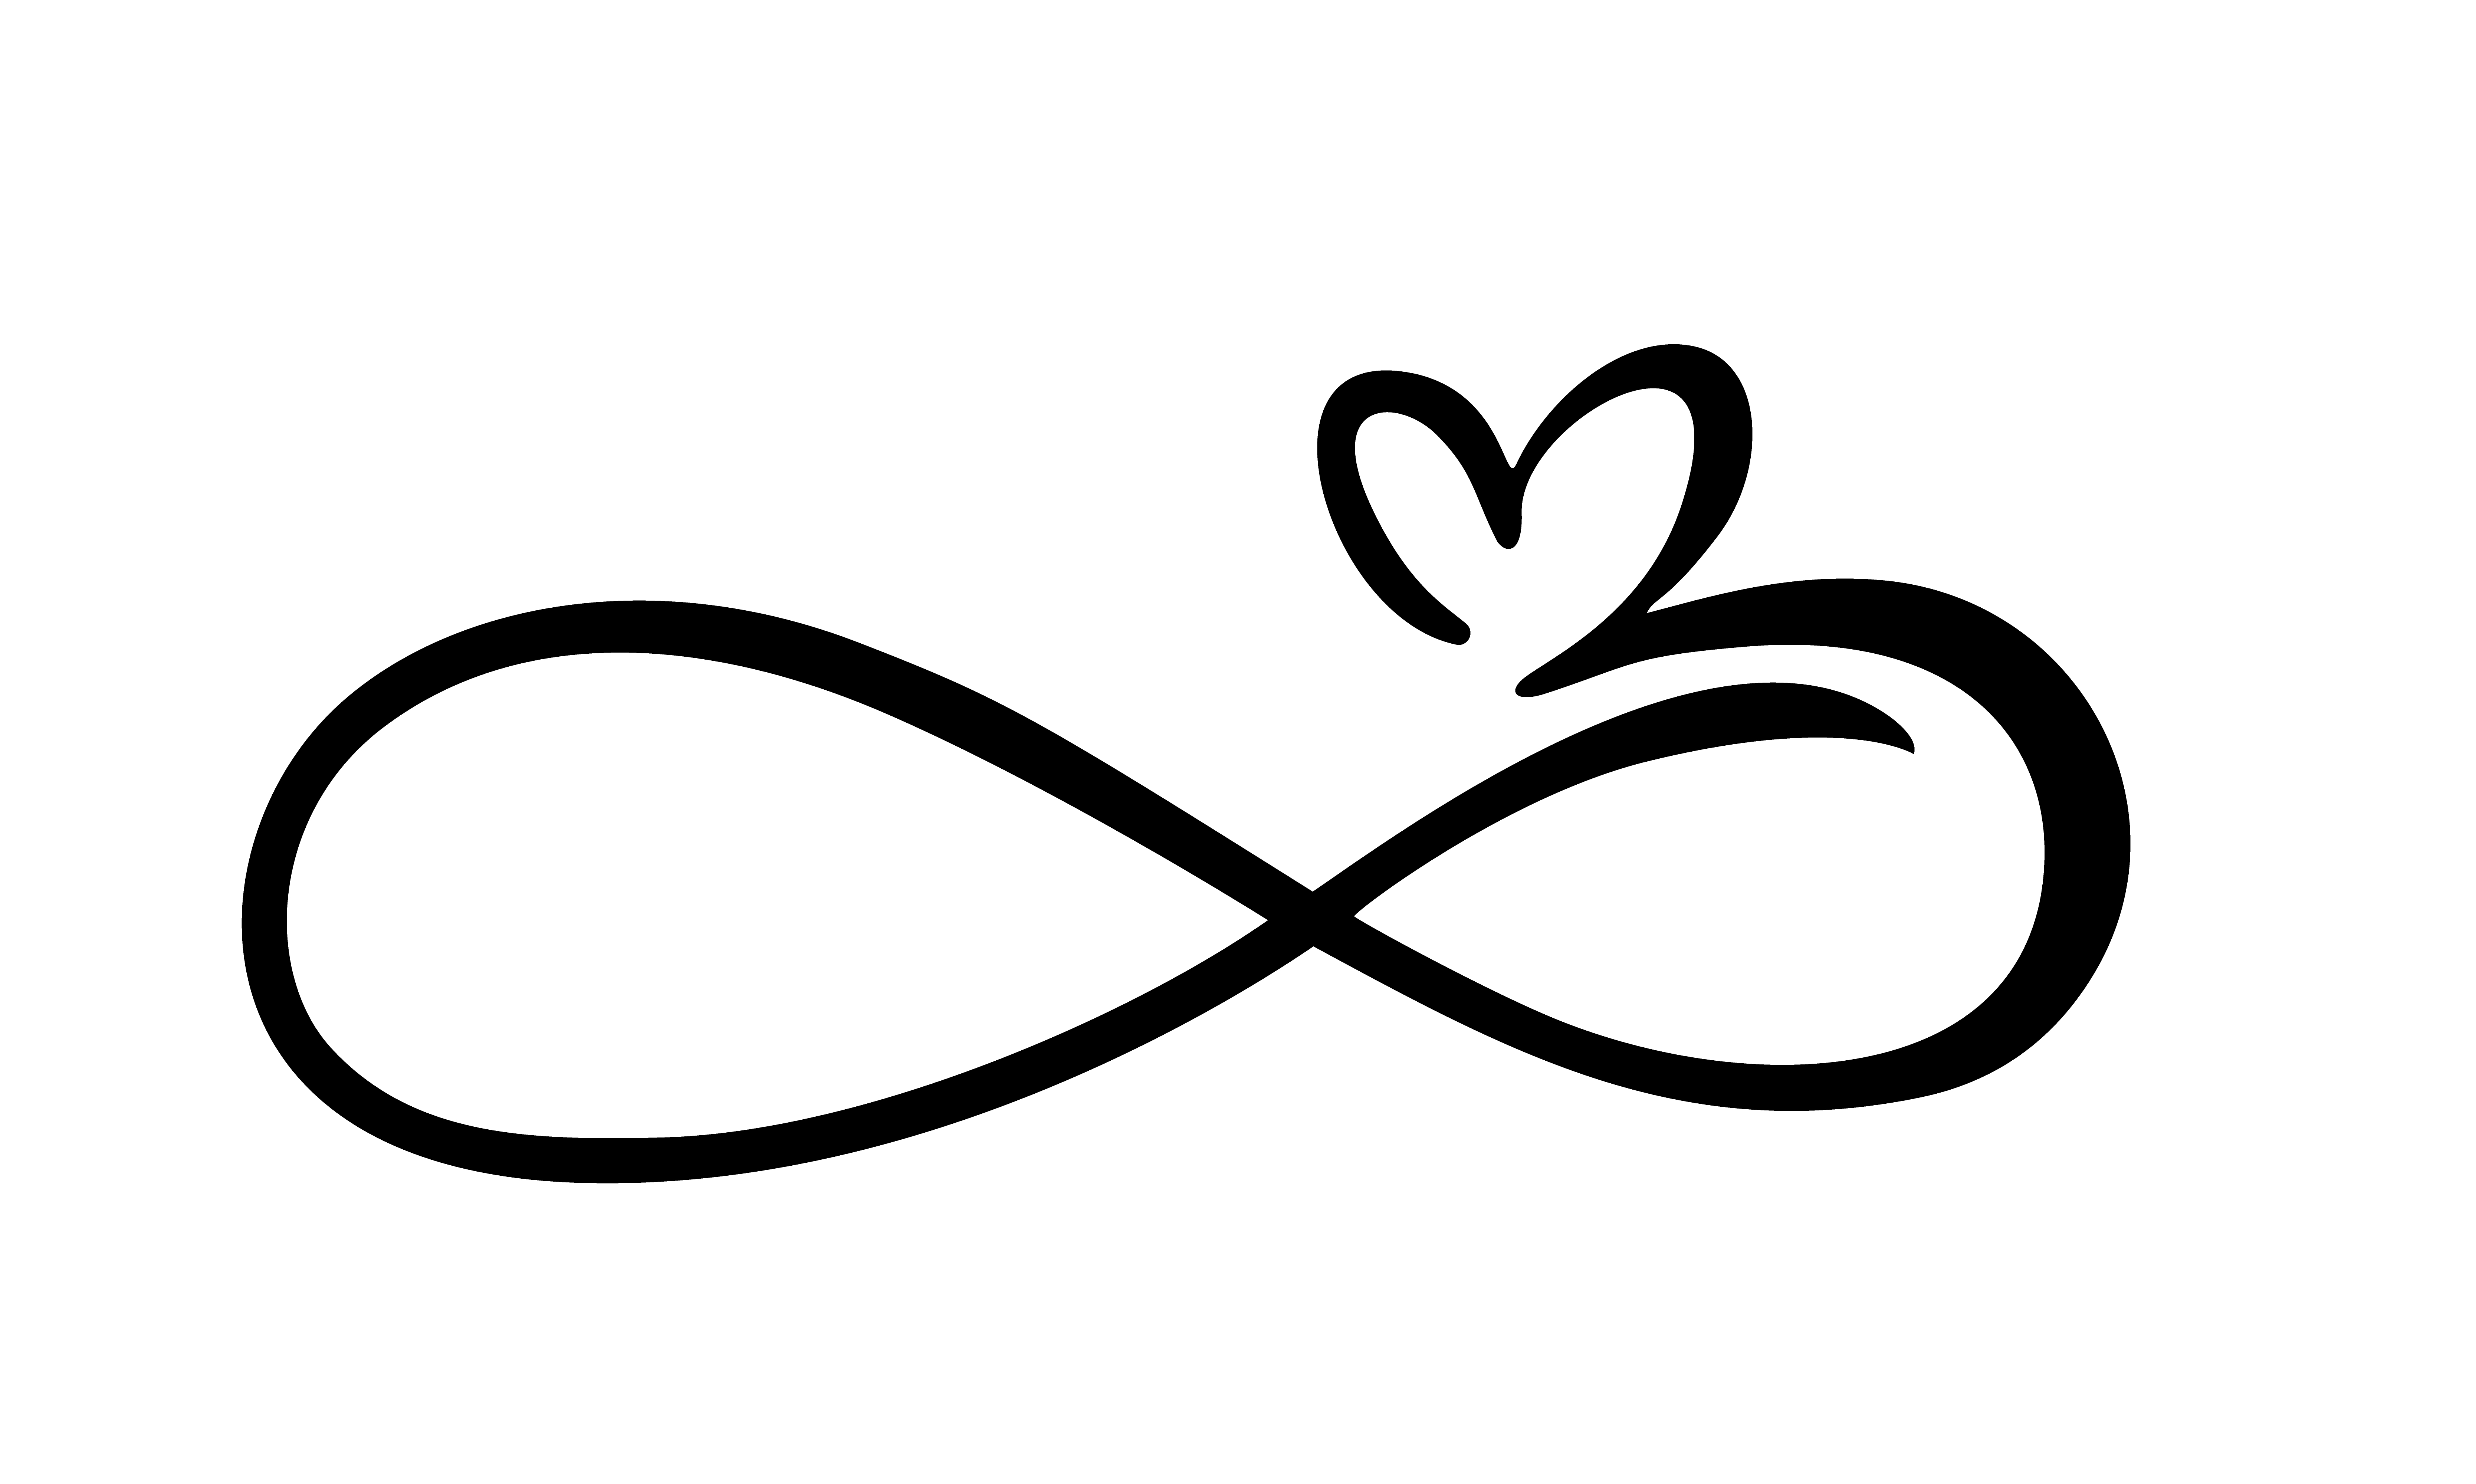 Download Heart Infinity Love Svg - Layered SVG Cut File - Download ...